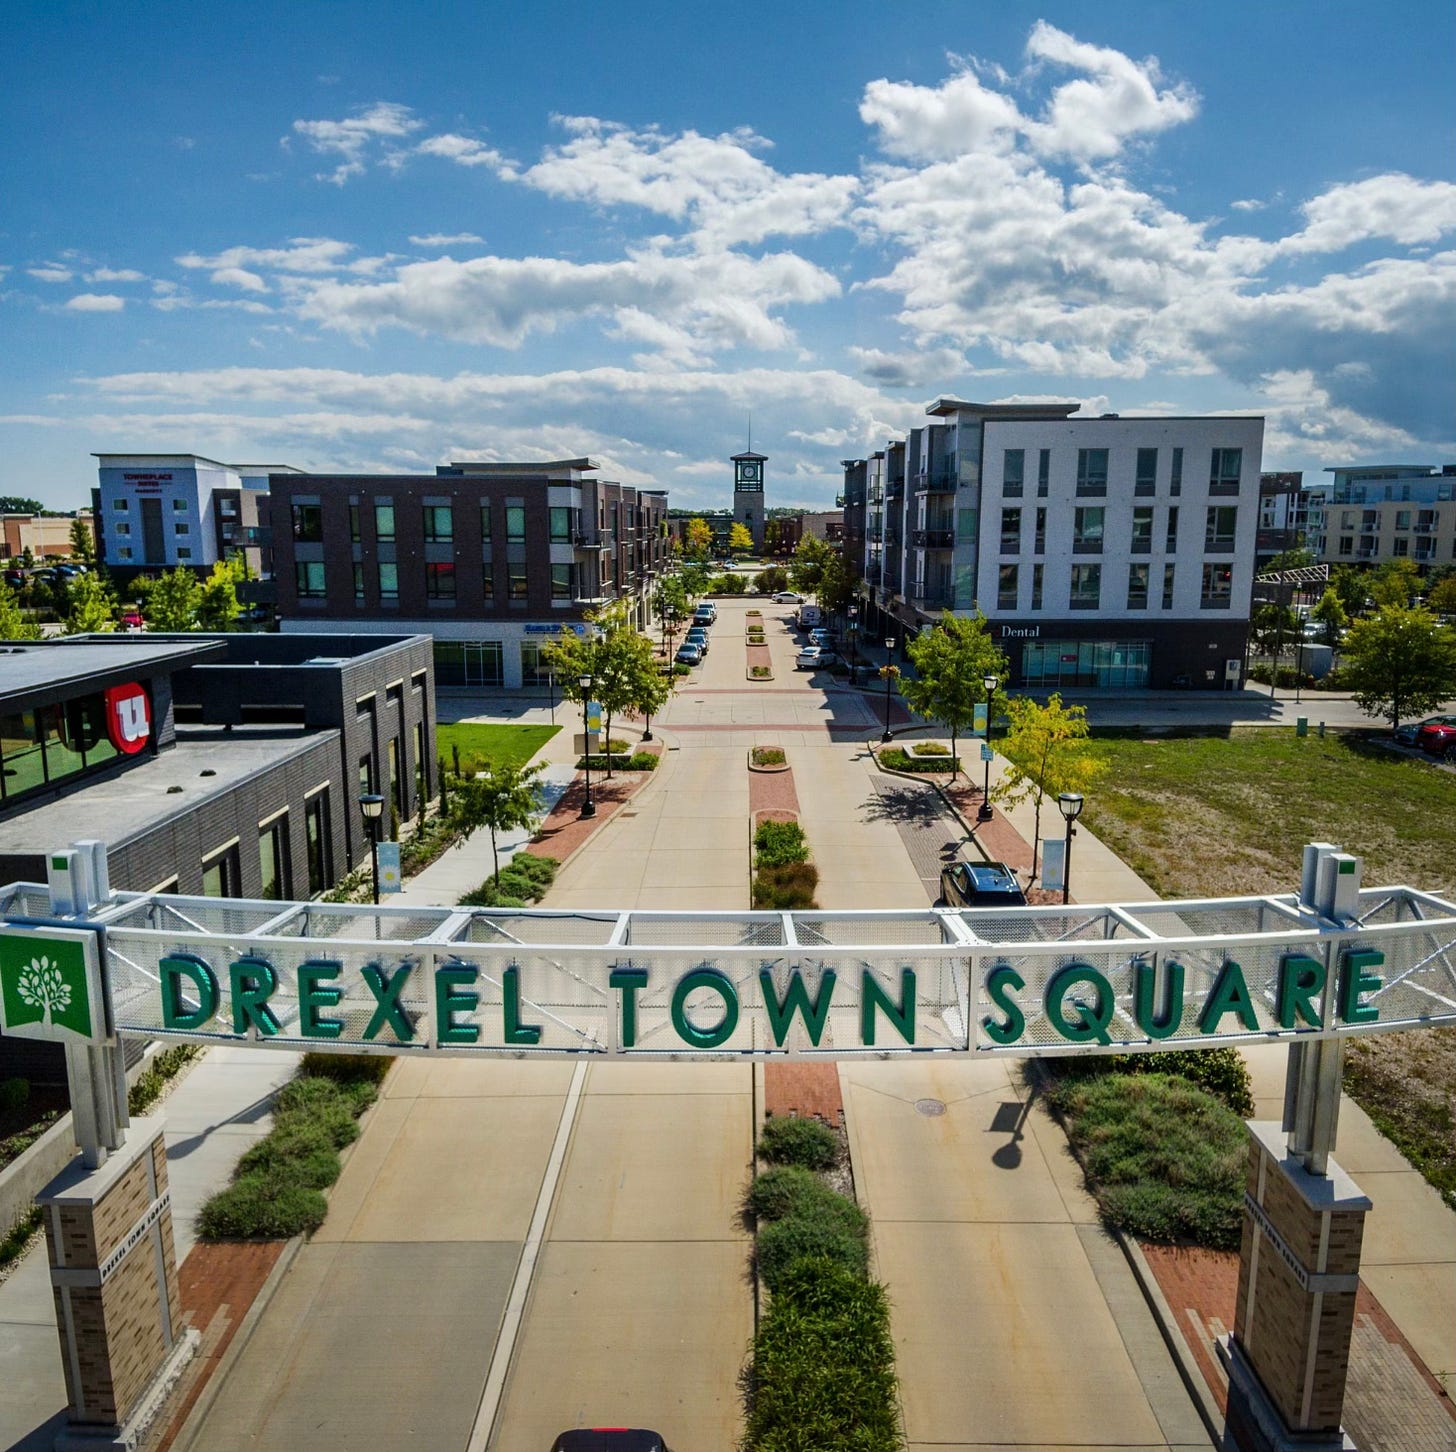 image of Drexel Town Square gateway sign and buildings, with clock tower in the distance